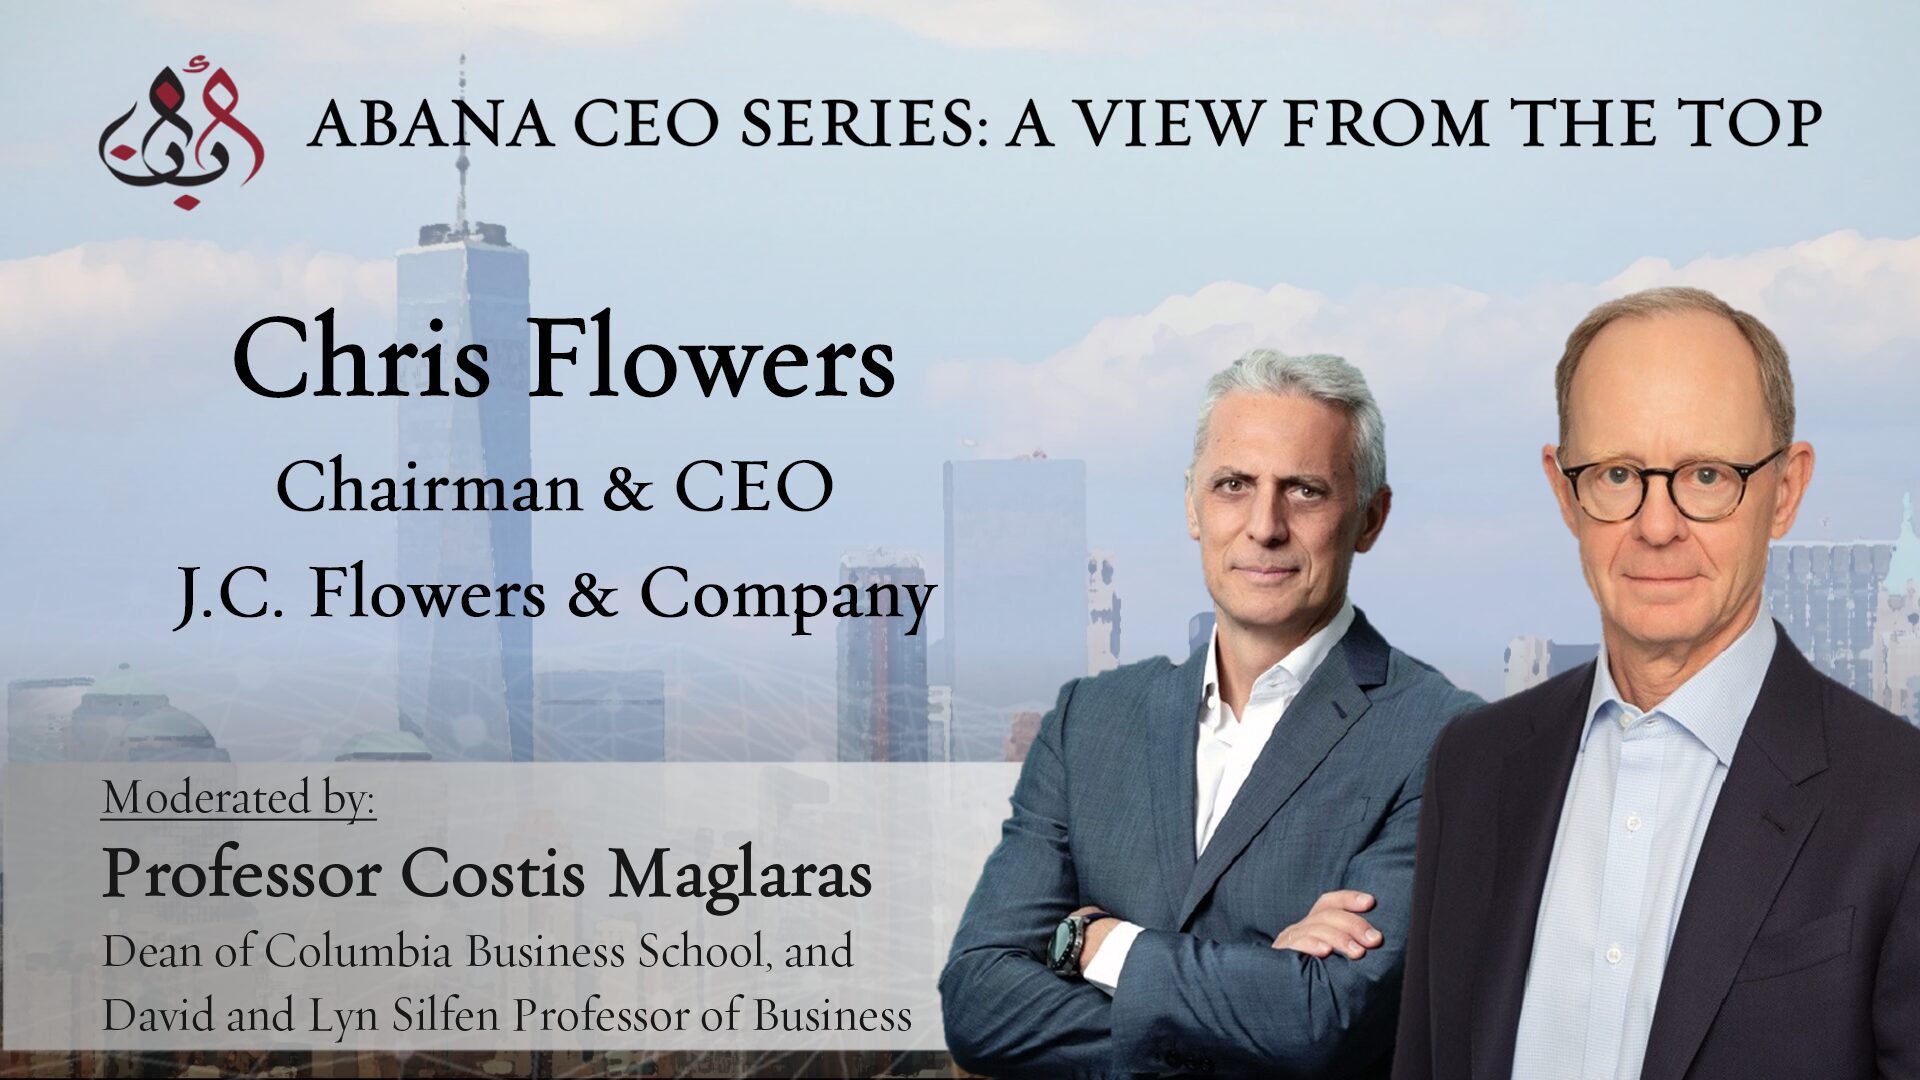 ABANA CEO Series: A View from the Top with Chris Flowers, Chairman & CEO of J.C. Flowers & Company